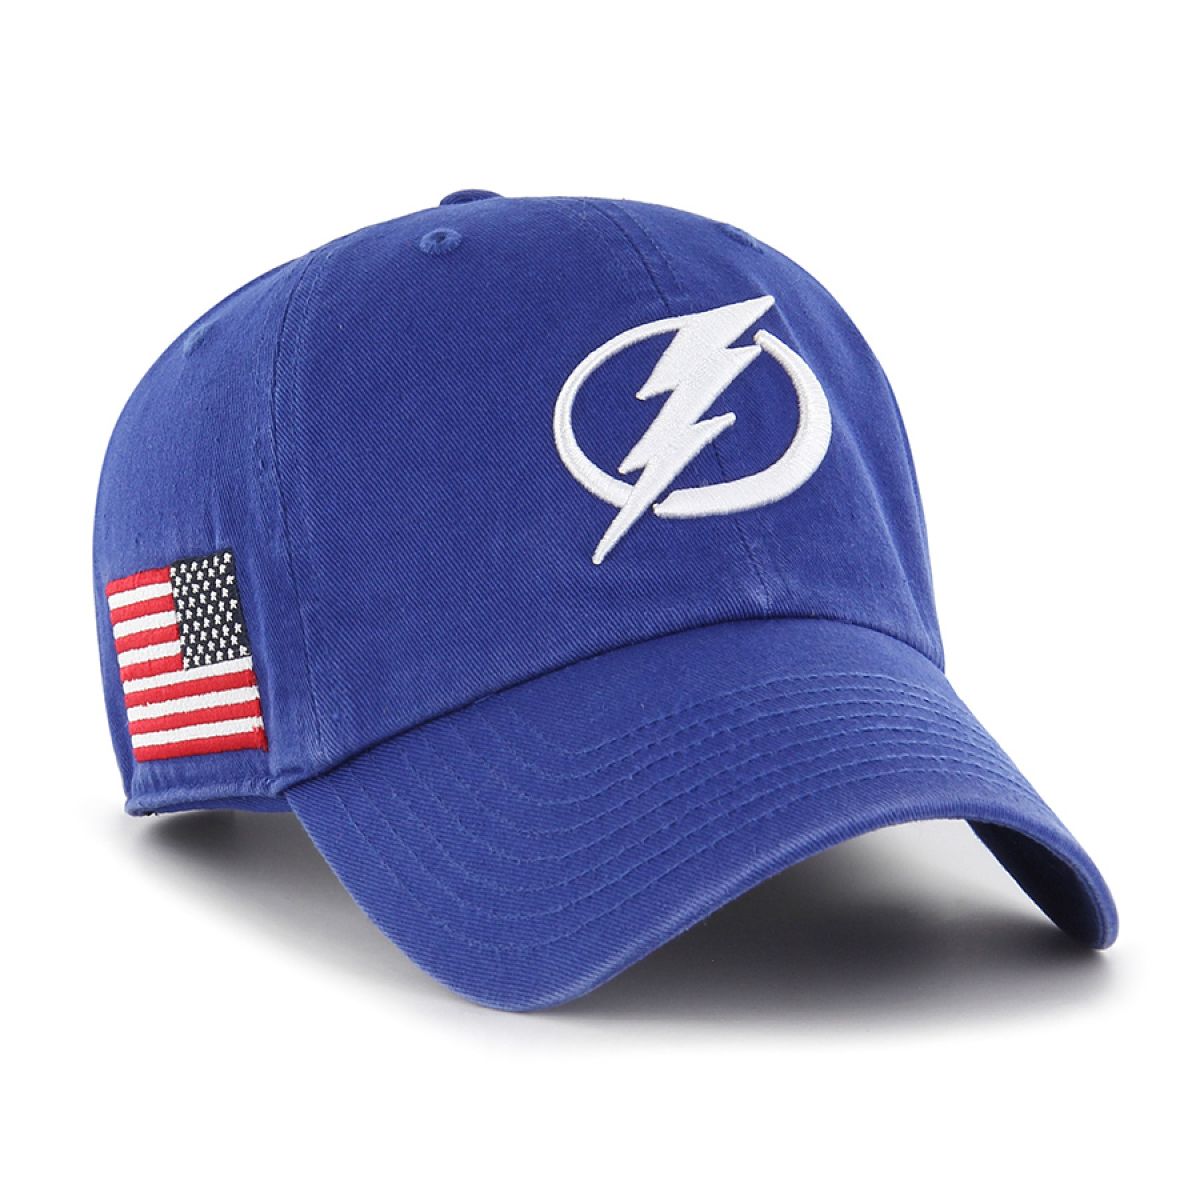 Tampa Bay Lightning '47 Adjustable Blue Clean Up Hat with American Flag Patch